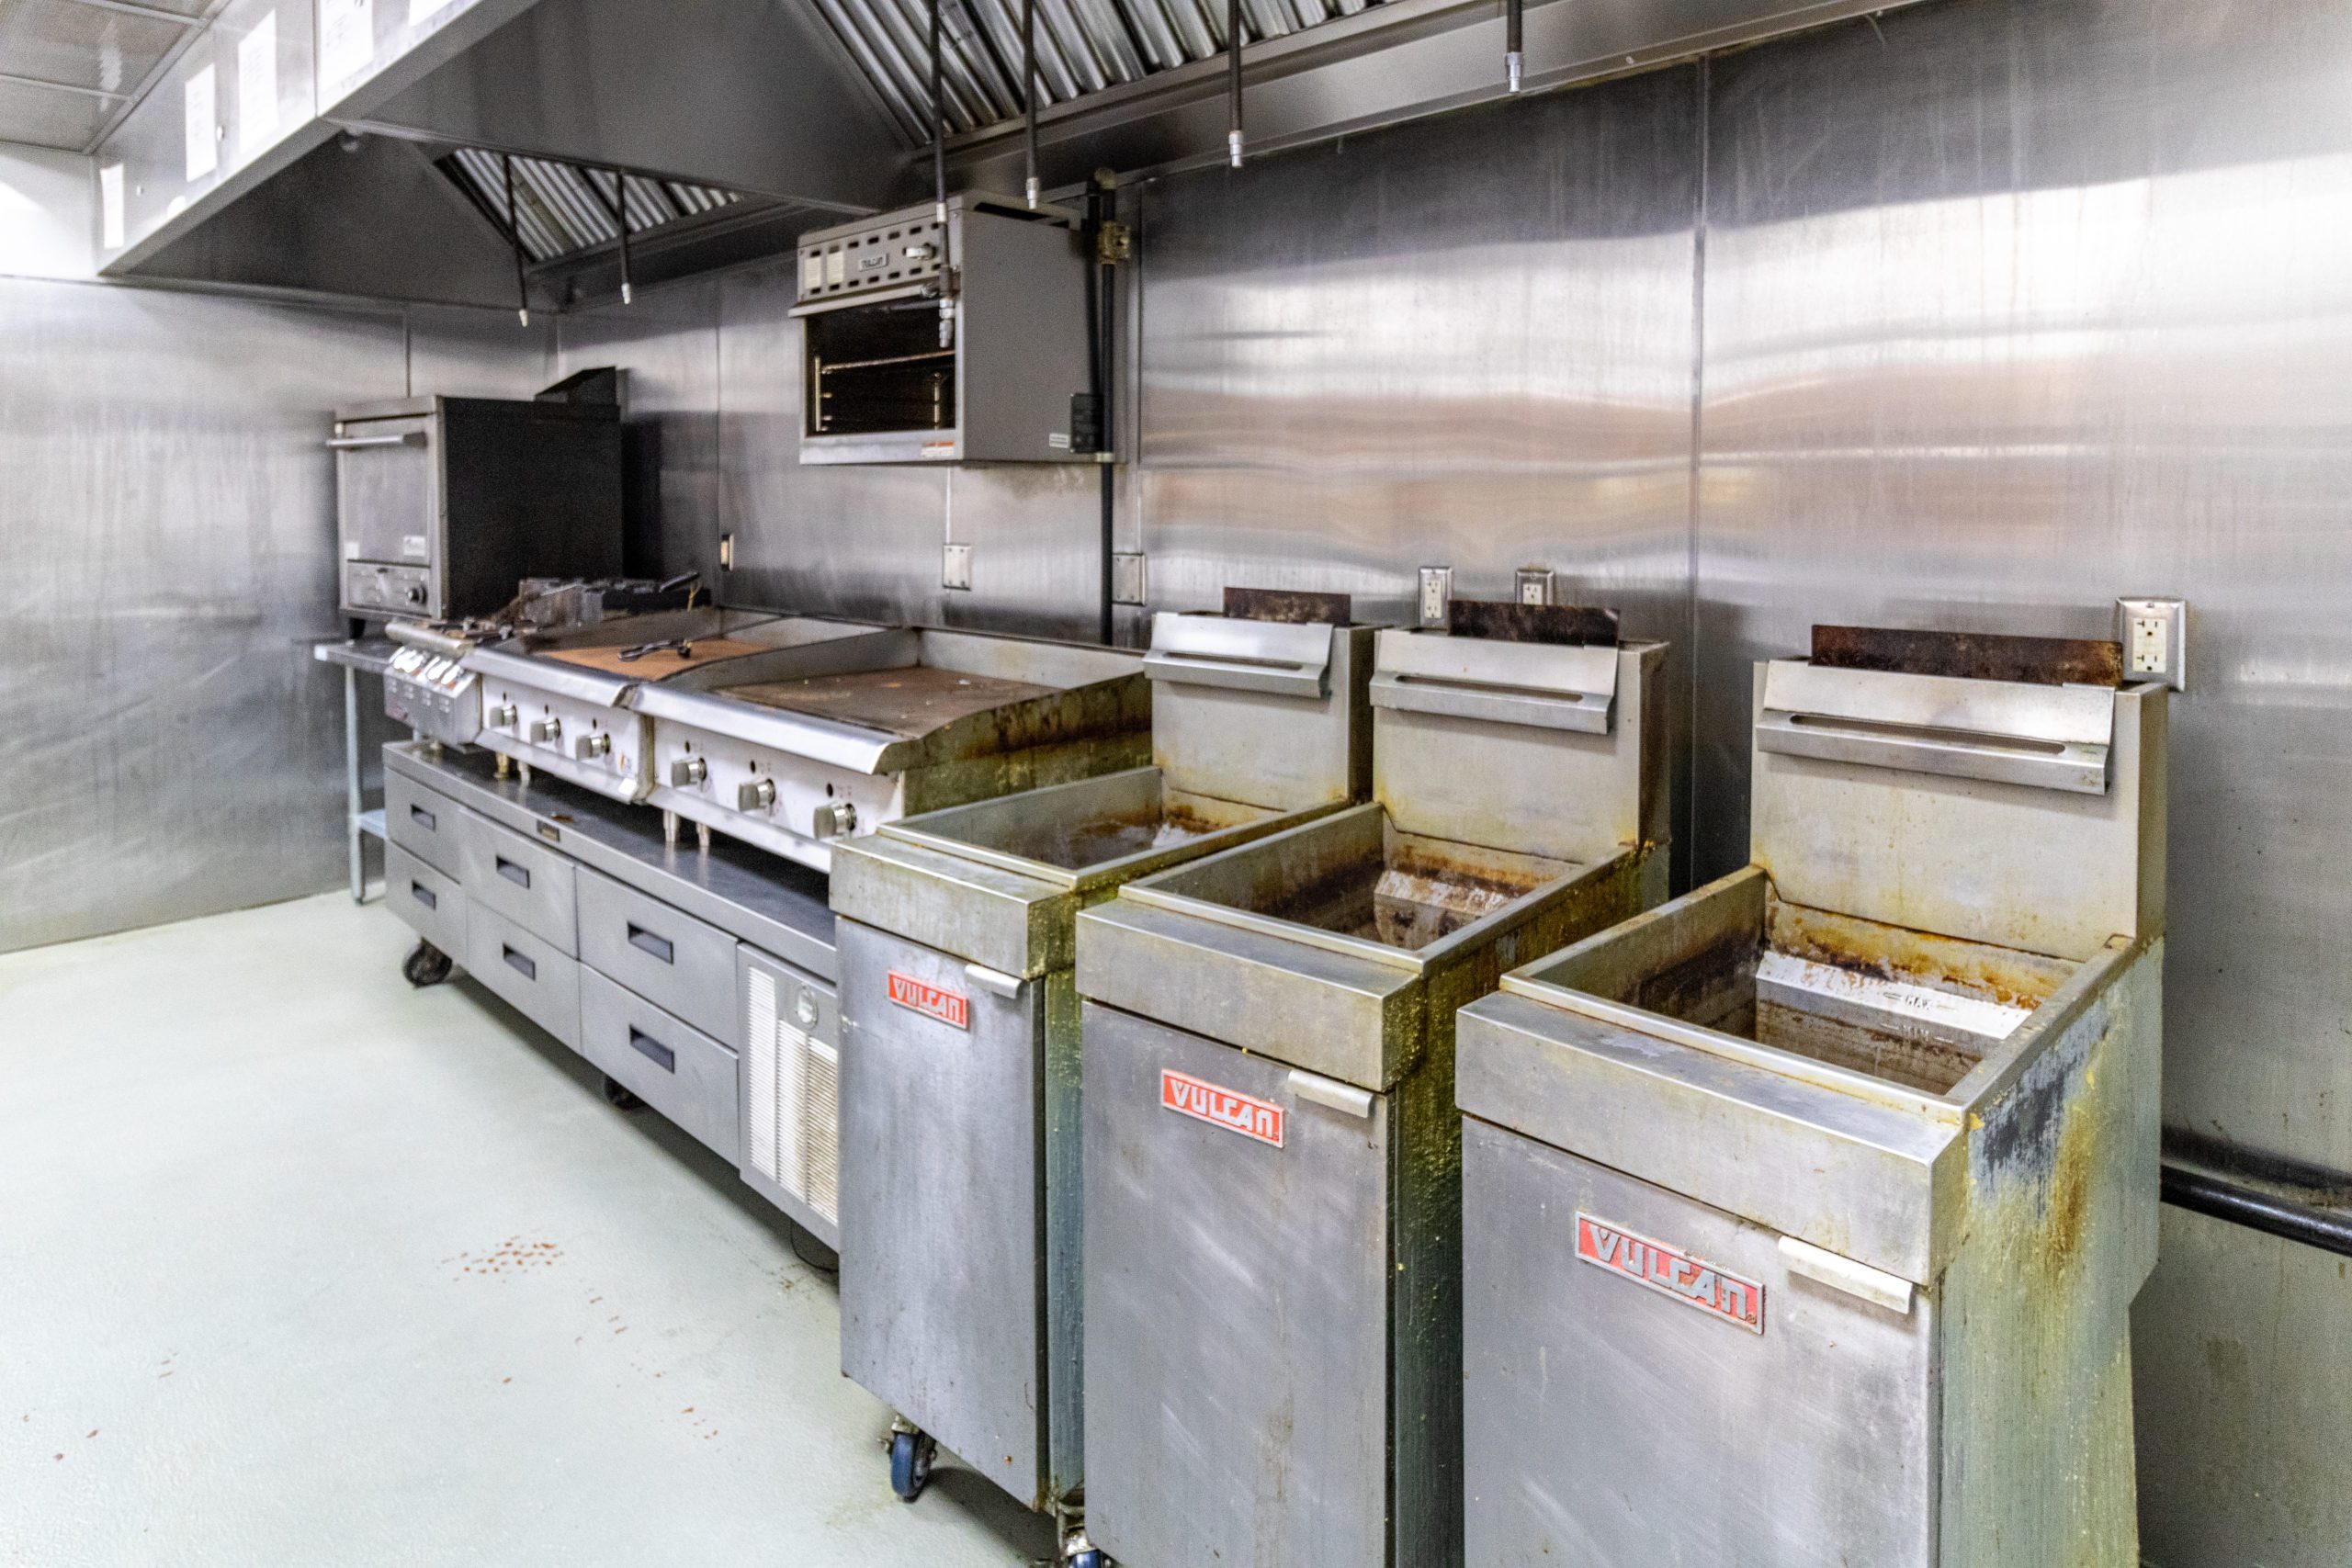 Commercial fryers and grills.